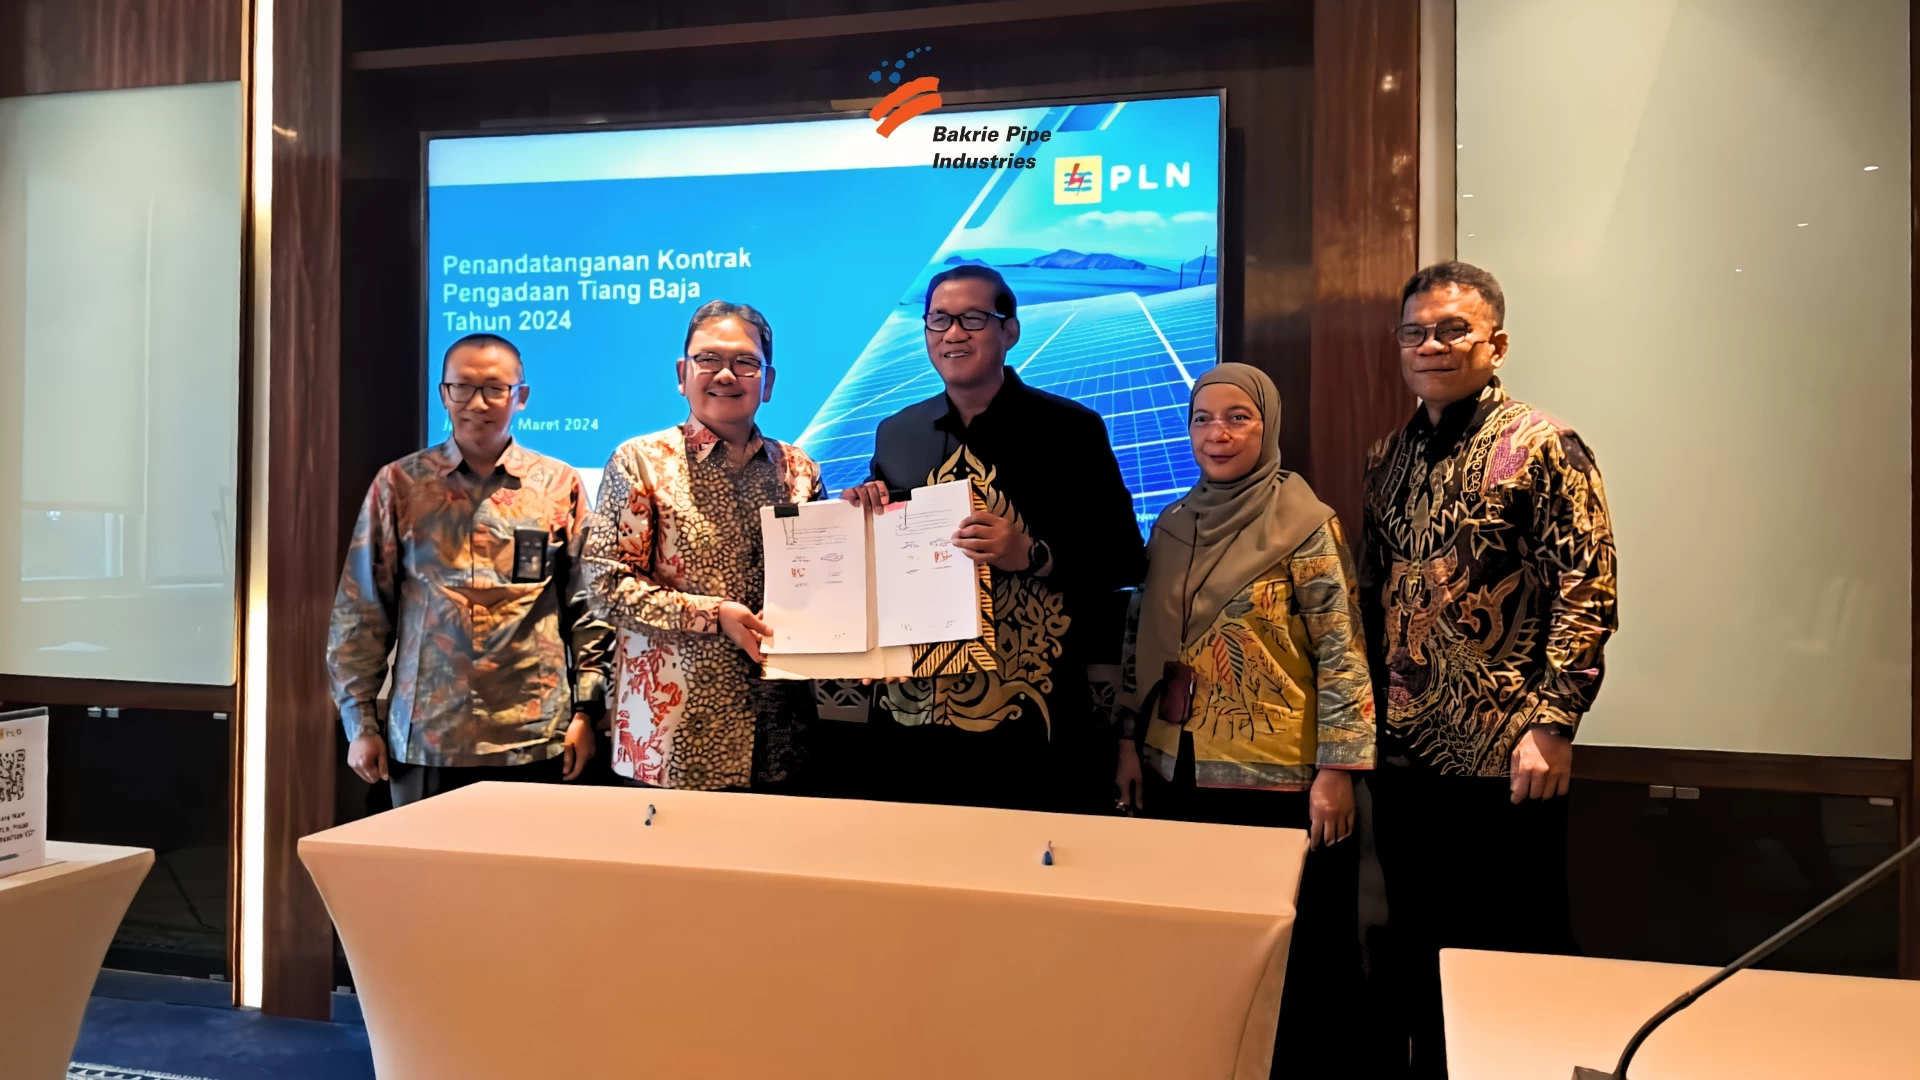 PT Bakrie Pipe Industries and PT PLN (Persero) signed a contract for the procurement of steel poles for 2024